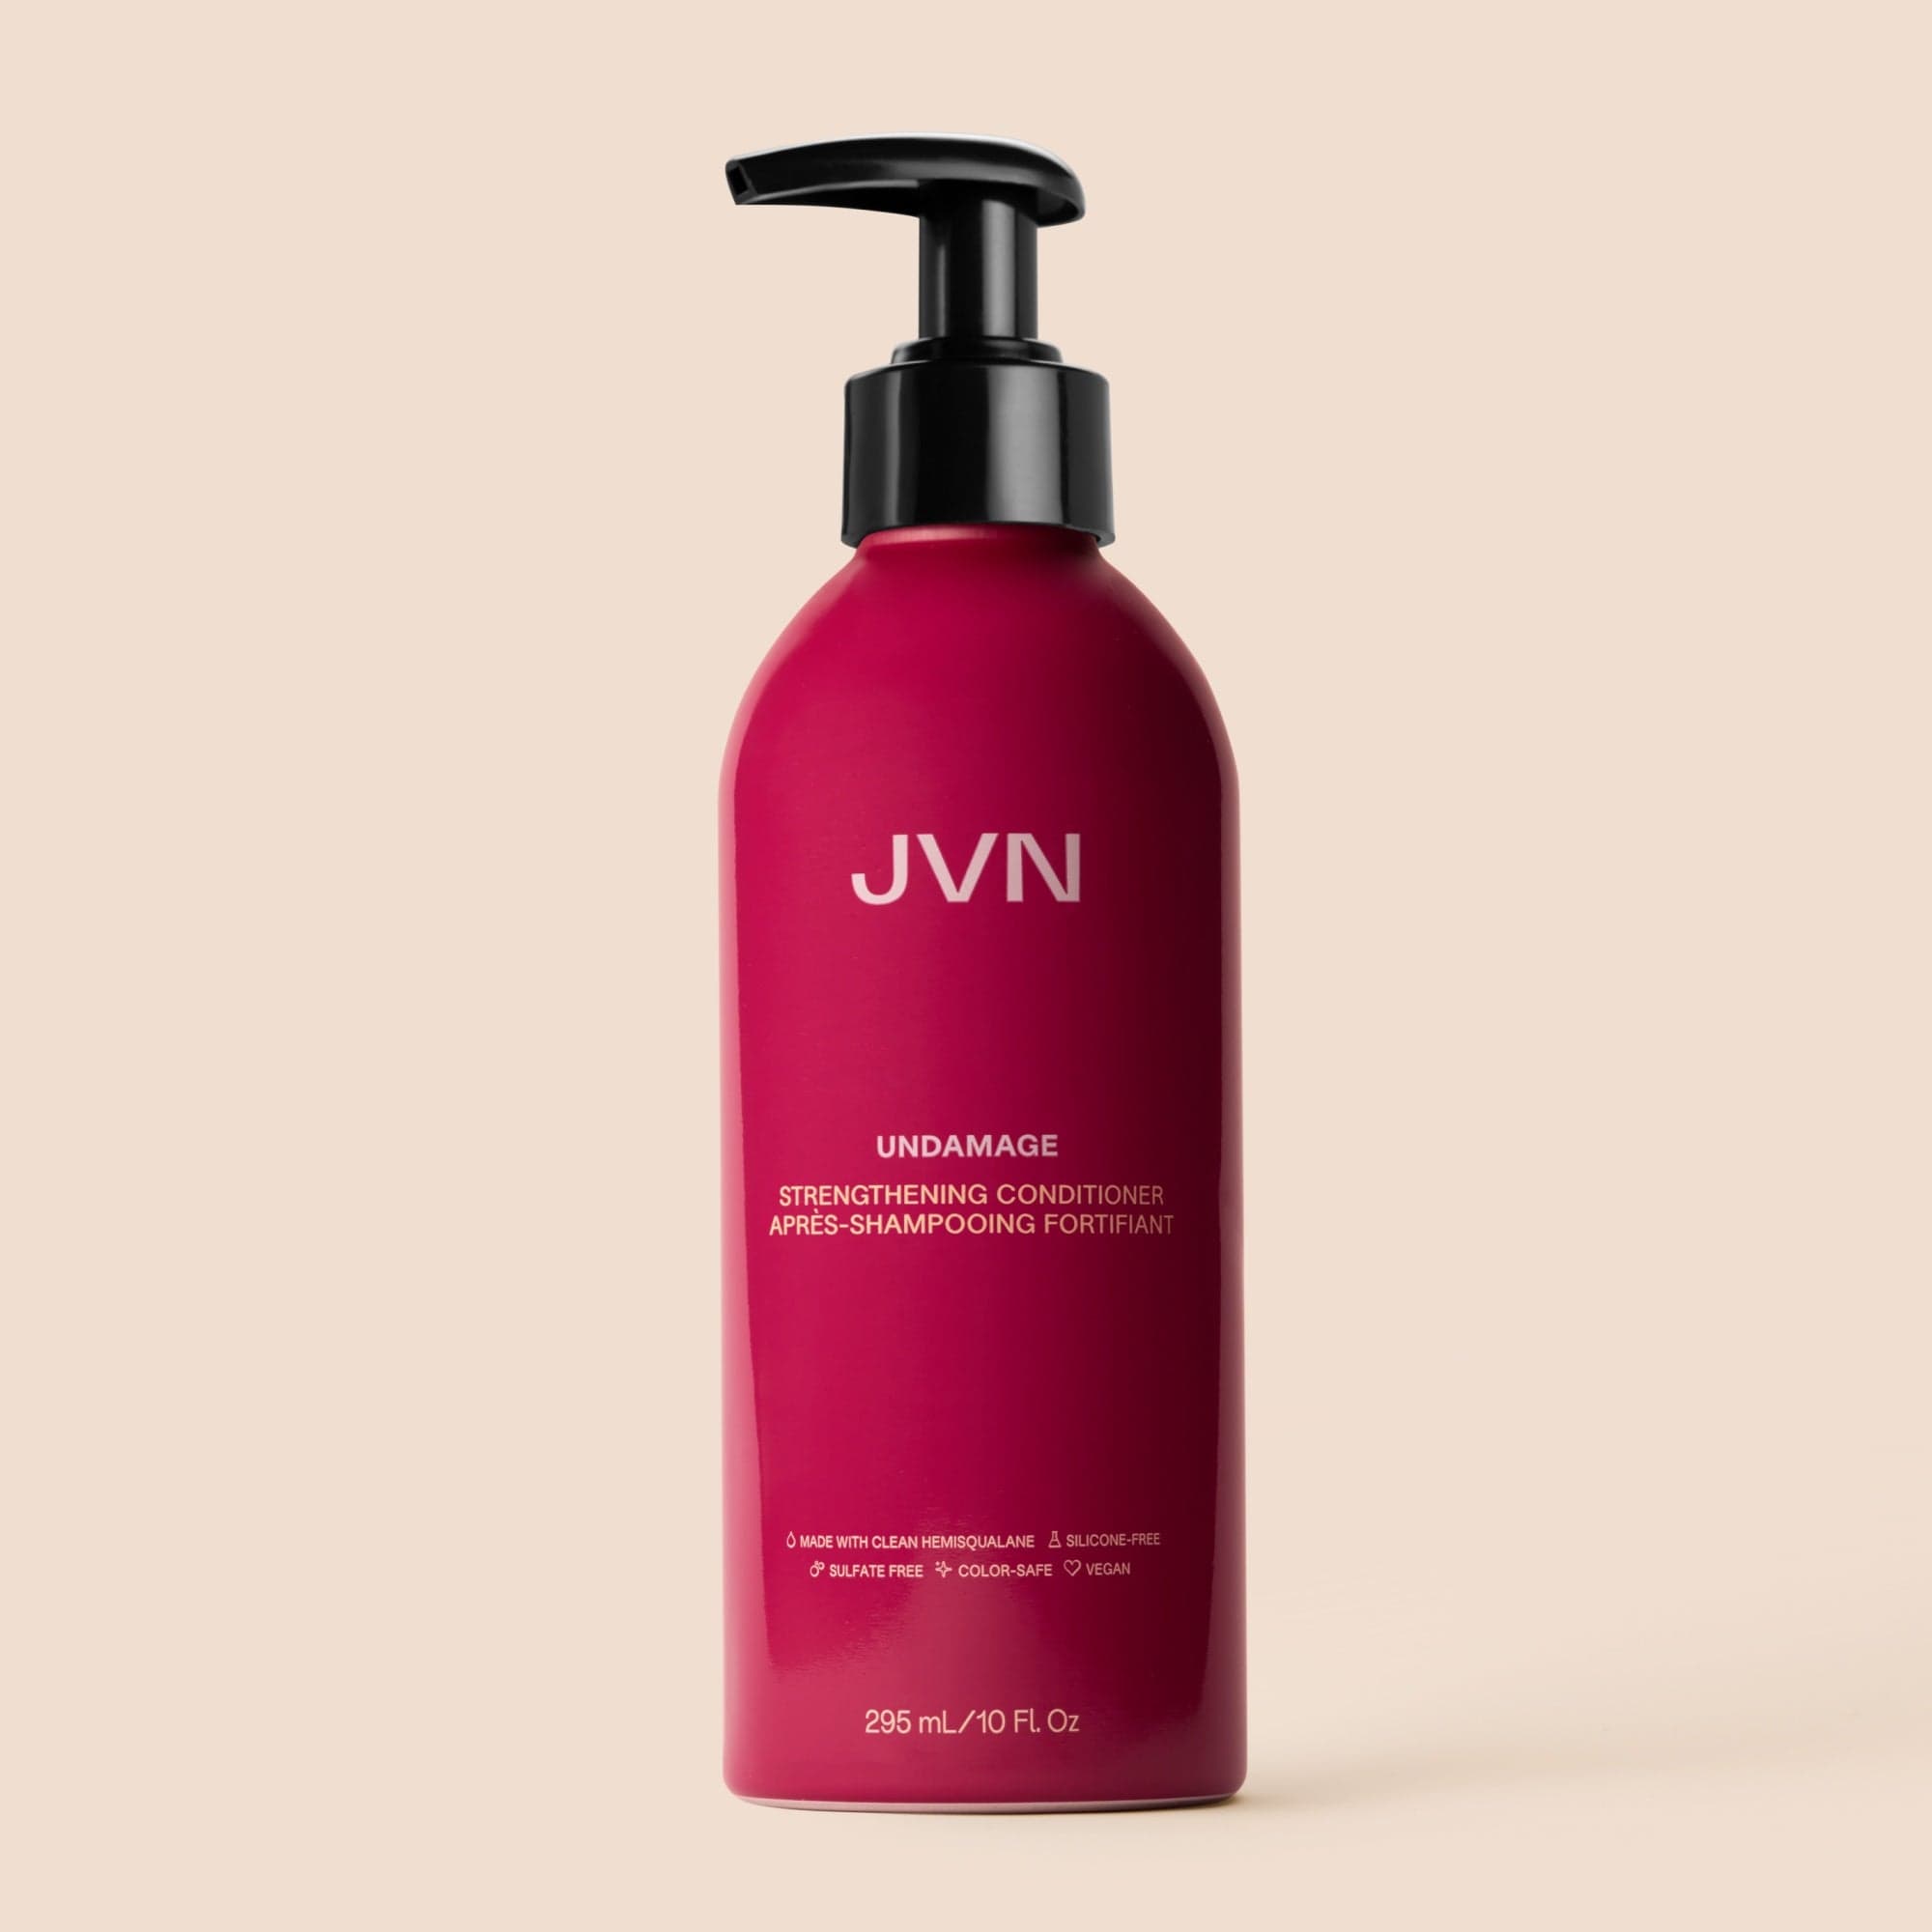 JVN Conditioner Undamage Strengthening Conditioner Undamage Strengthening Conditioner | Reparative Conditioning Products | JVN sulfate-free silicone-free sustainable